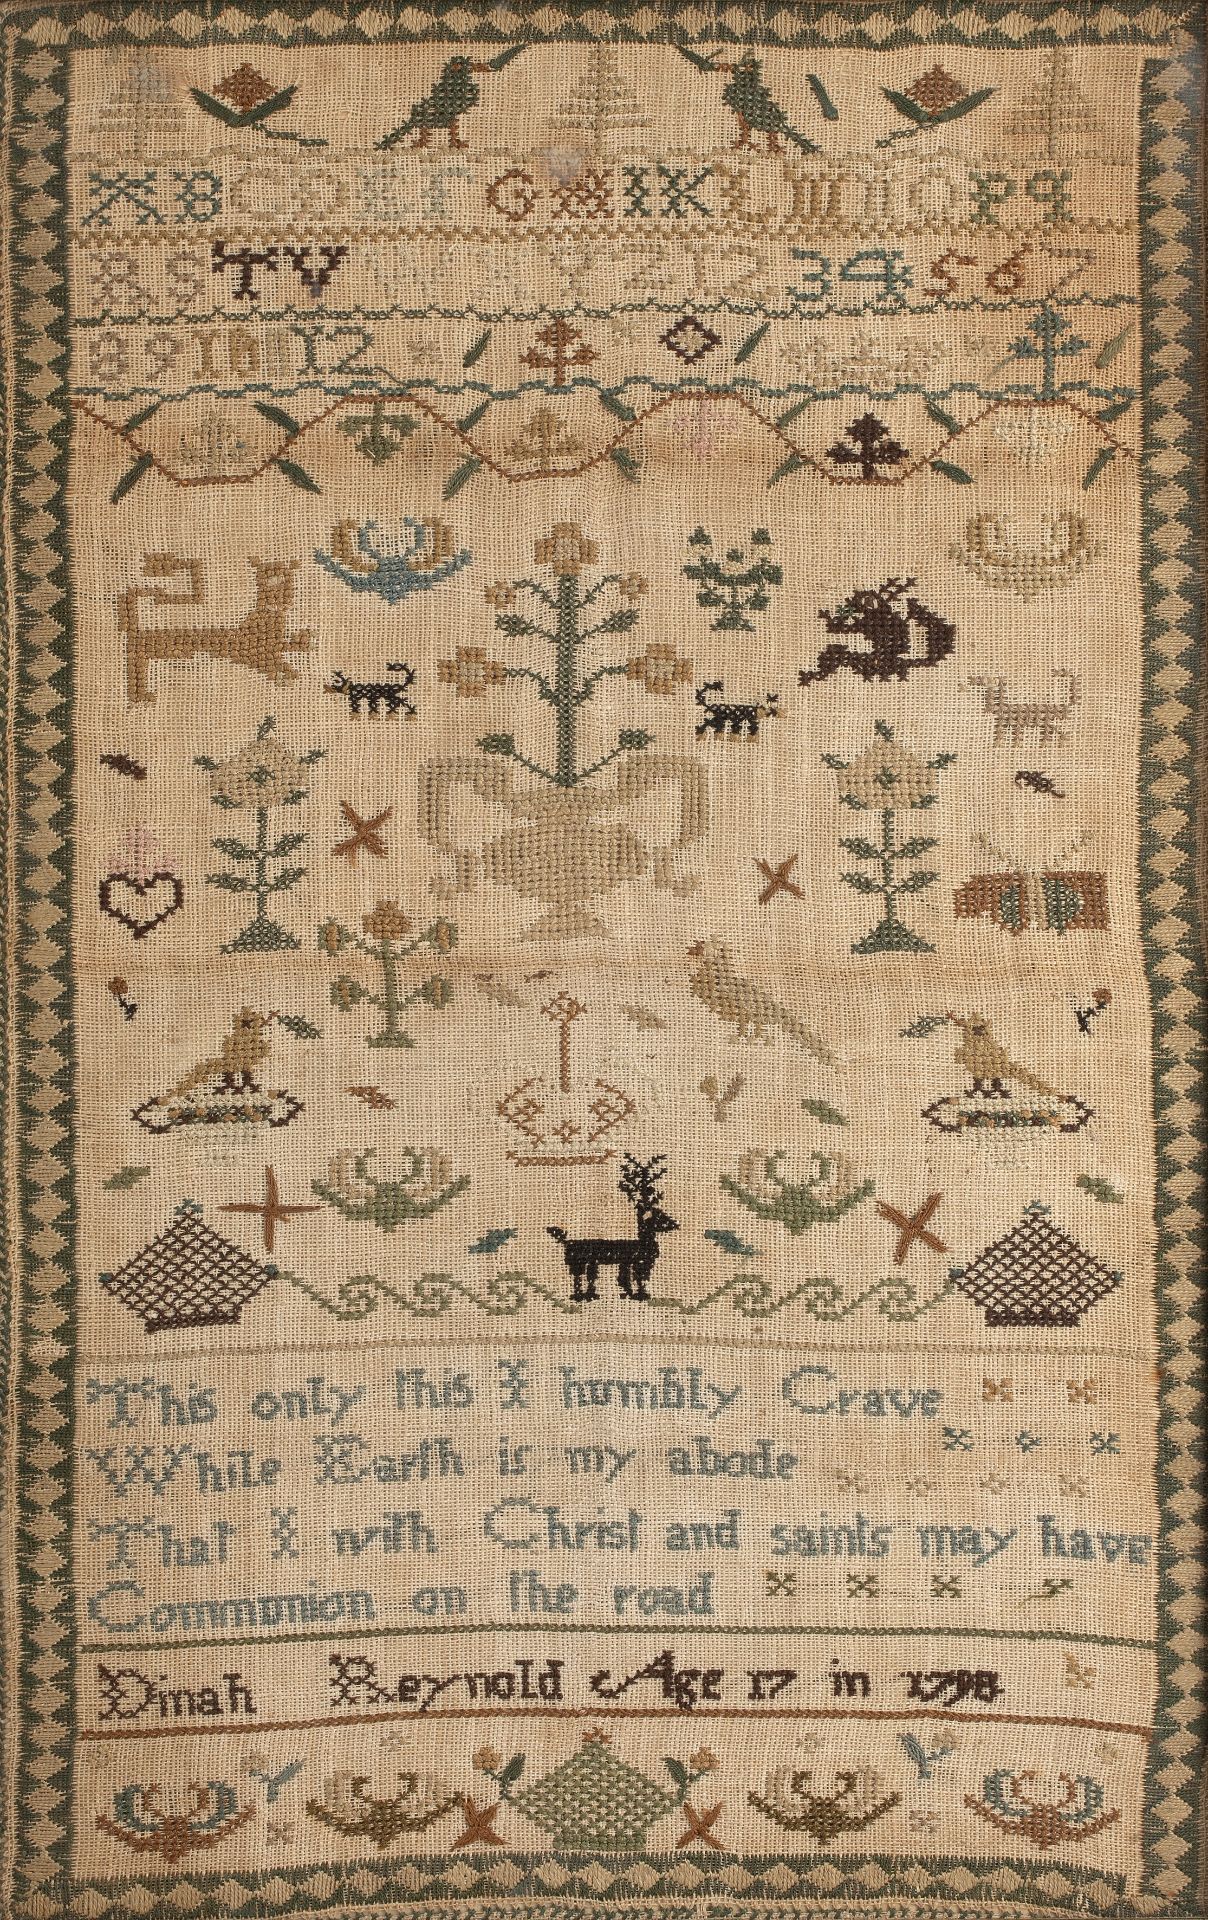 A late 18th century sampler, worked by Dinah Reynolds age 17 in 1798 25cm x 39cm.